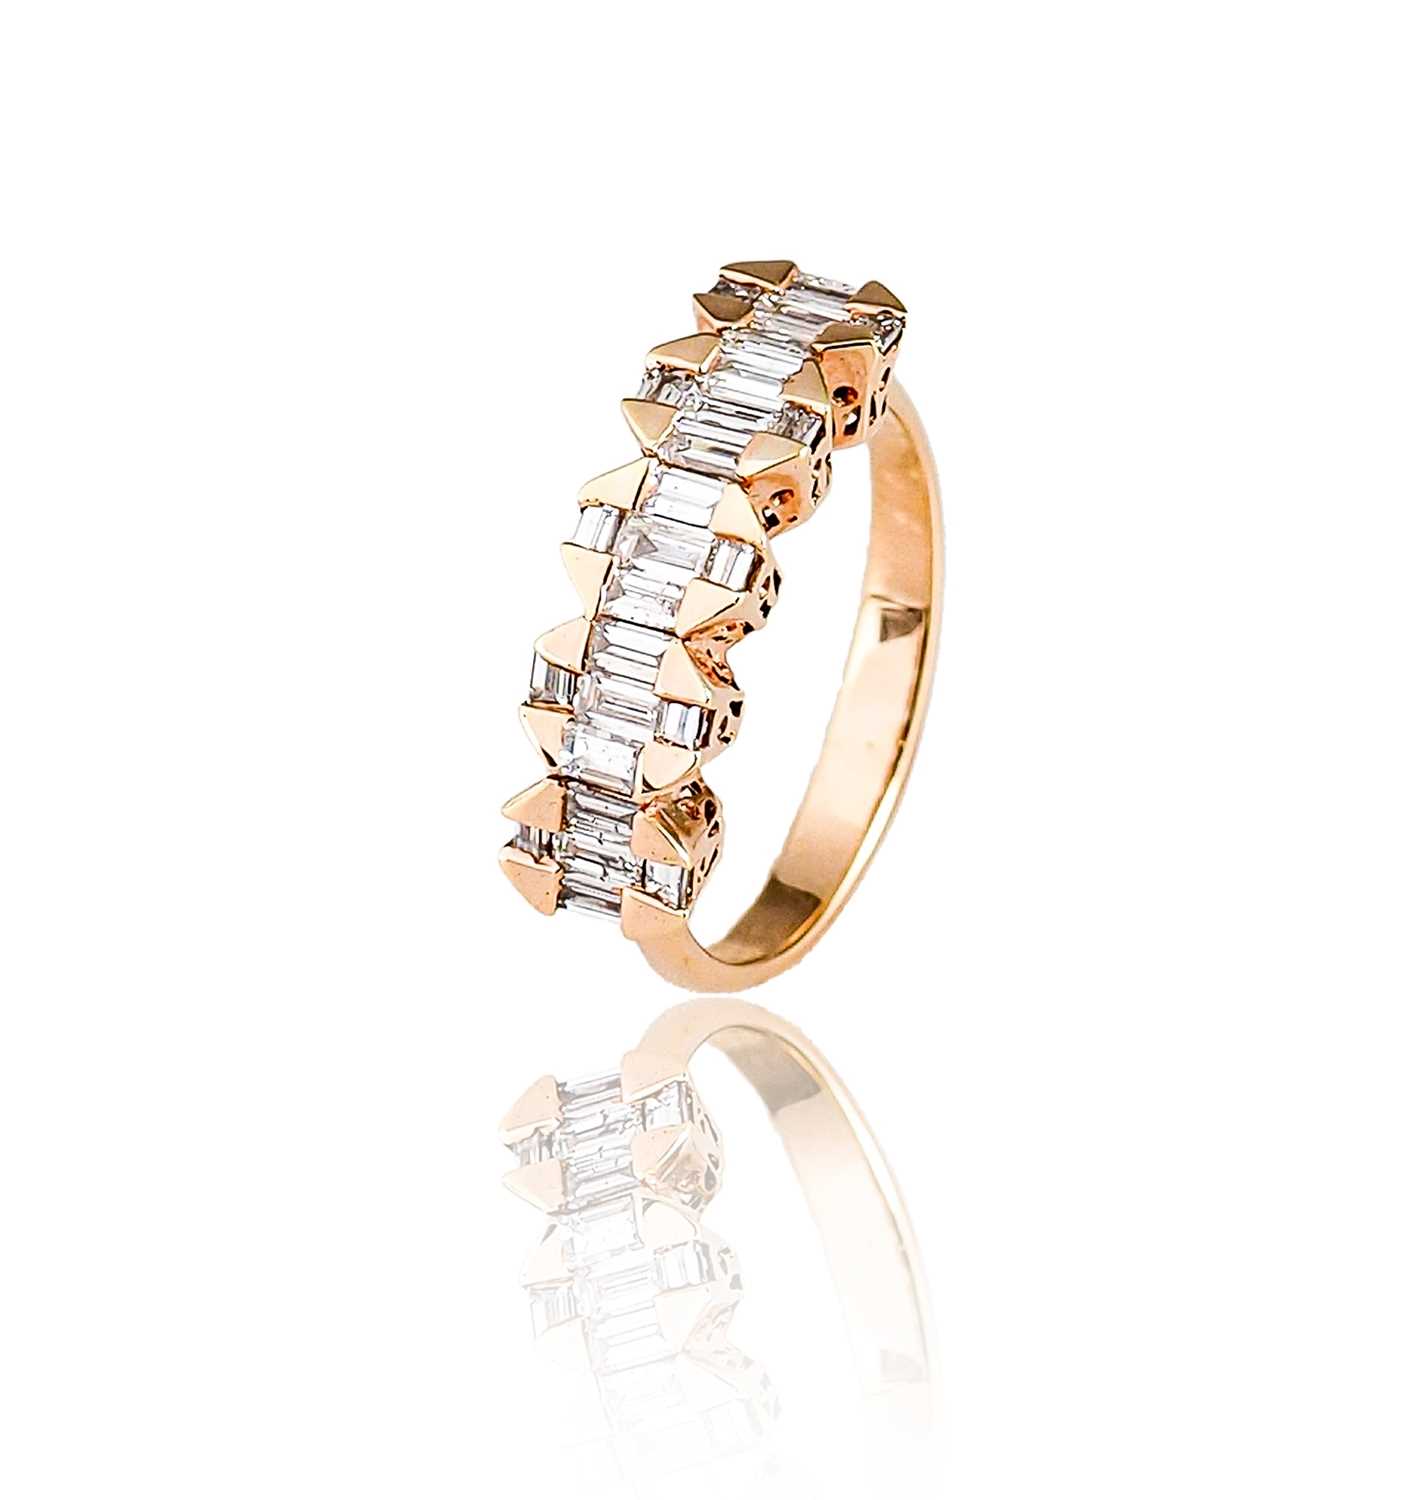 Lot 552 - Gold Ring with Diamonds